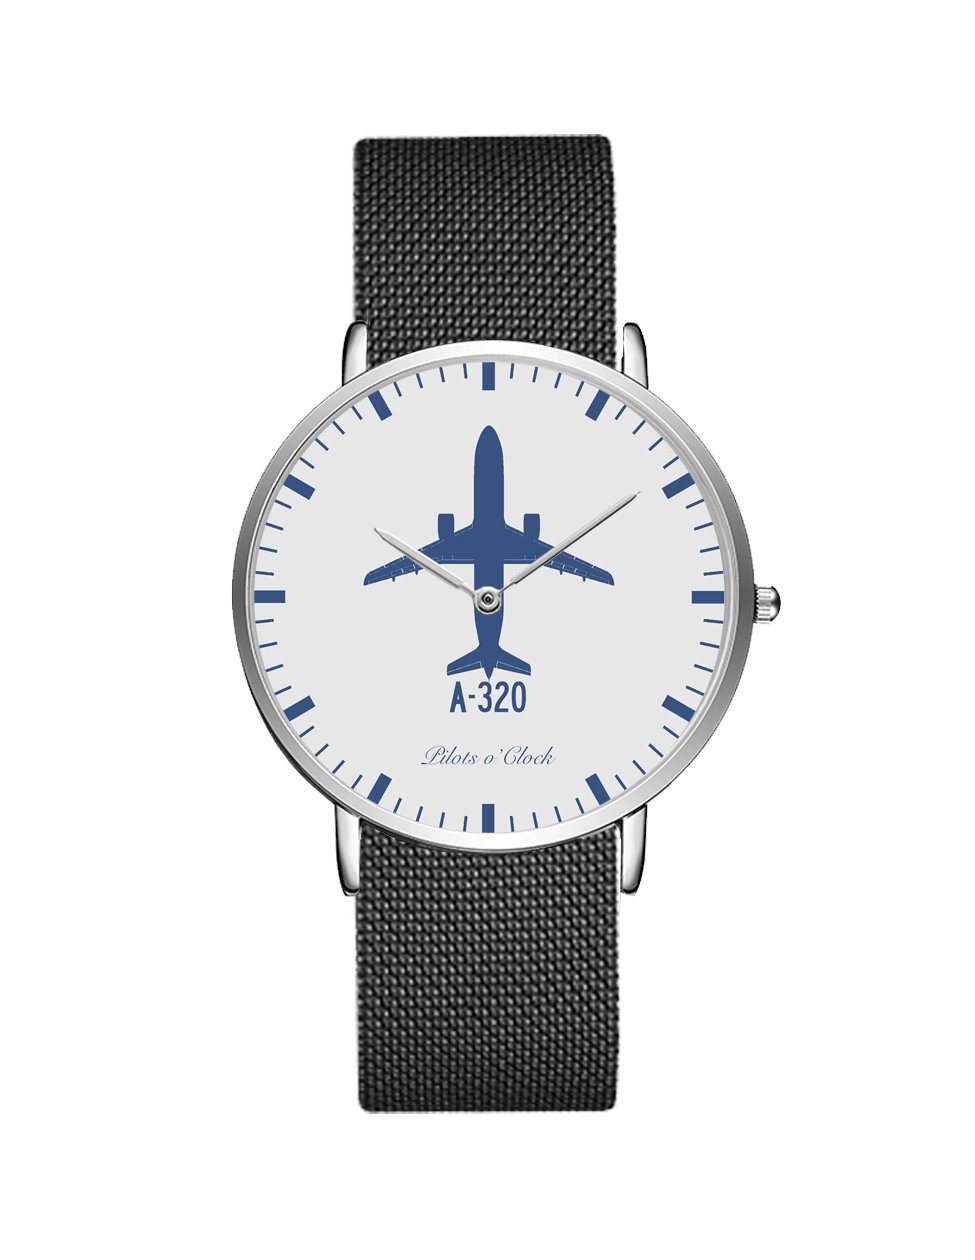 Airbus A320 Stainless Steel Strap Watches Pilot Eyes Store Silver & Black Stainless Steel Strap 